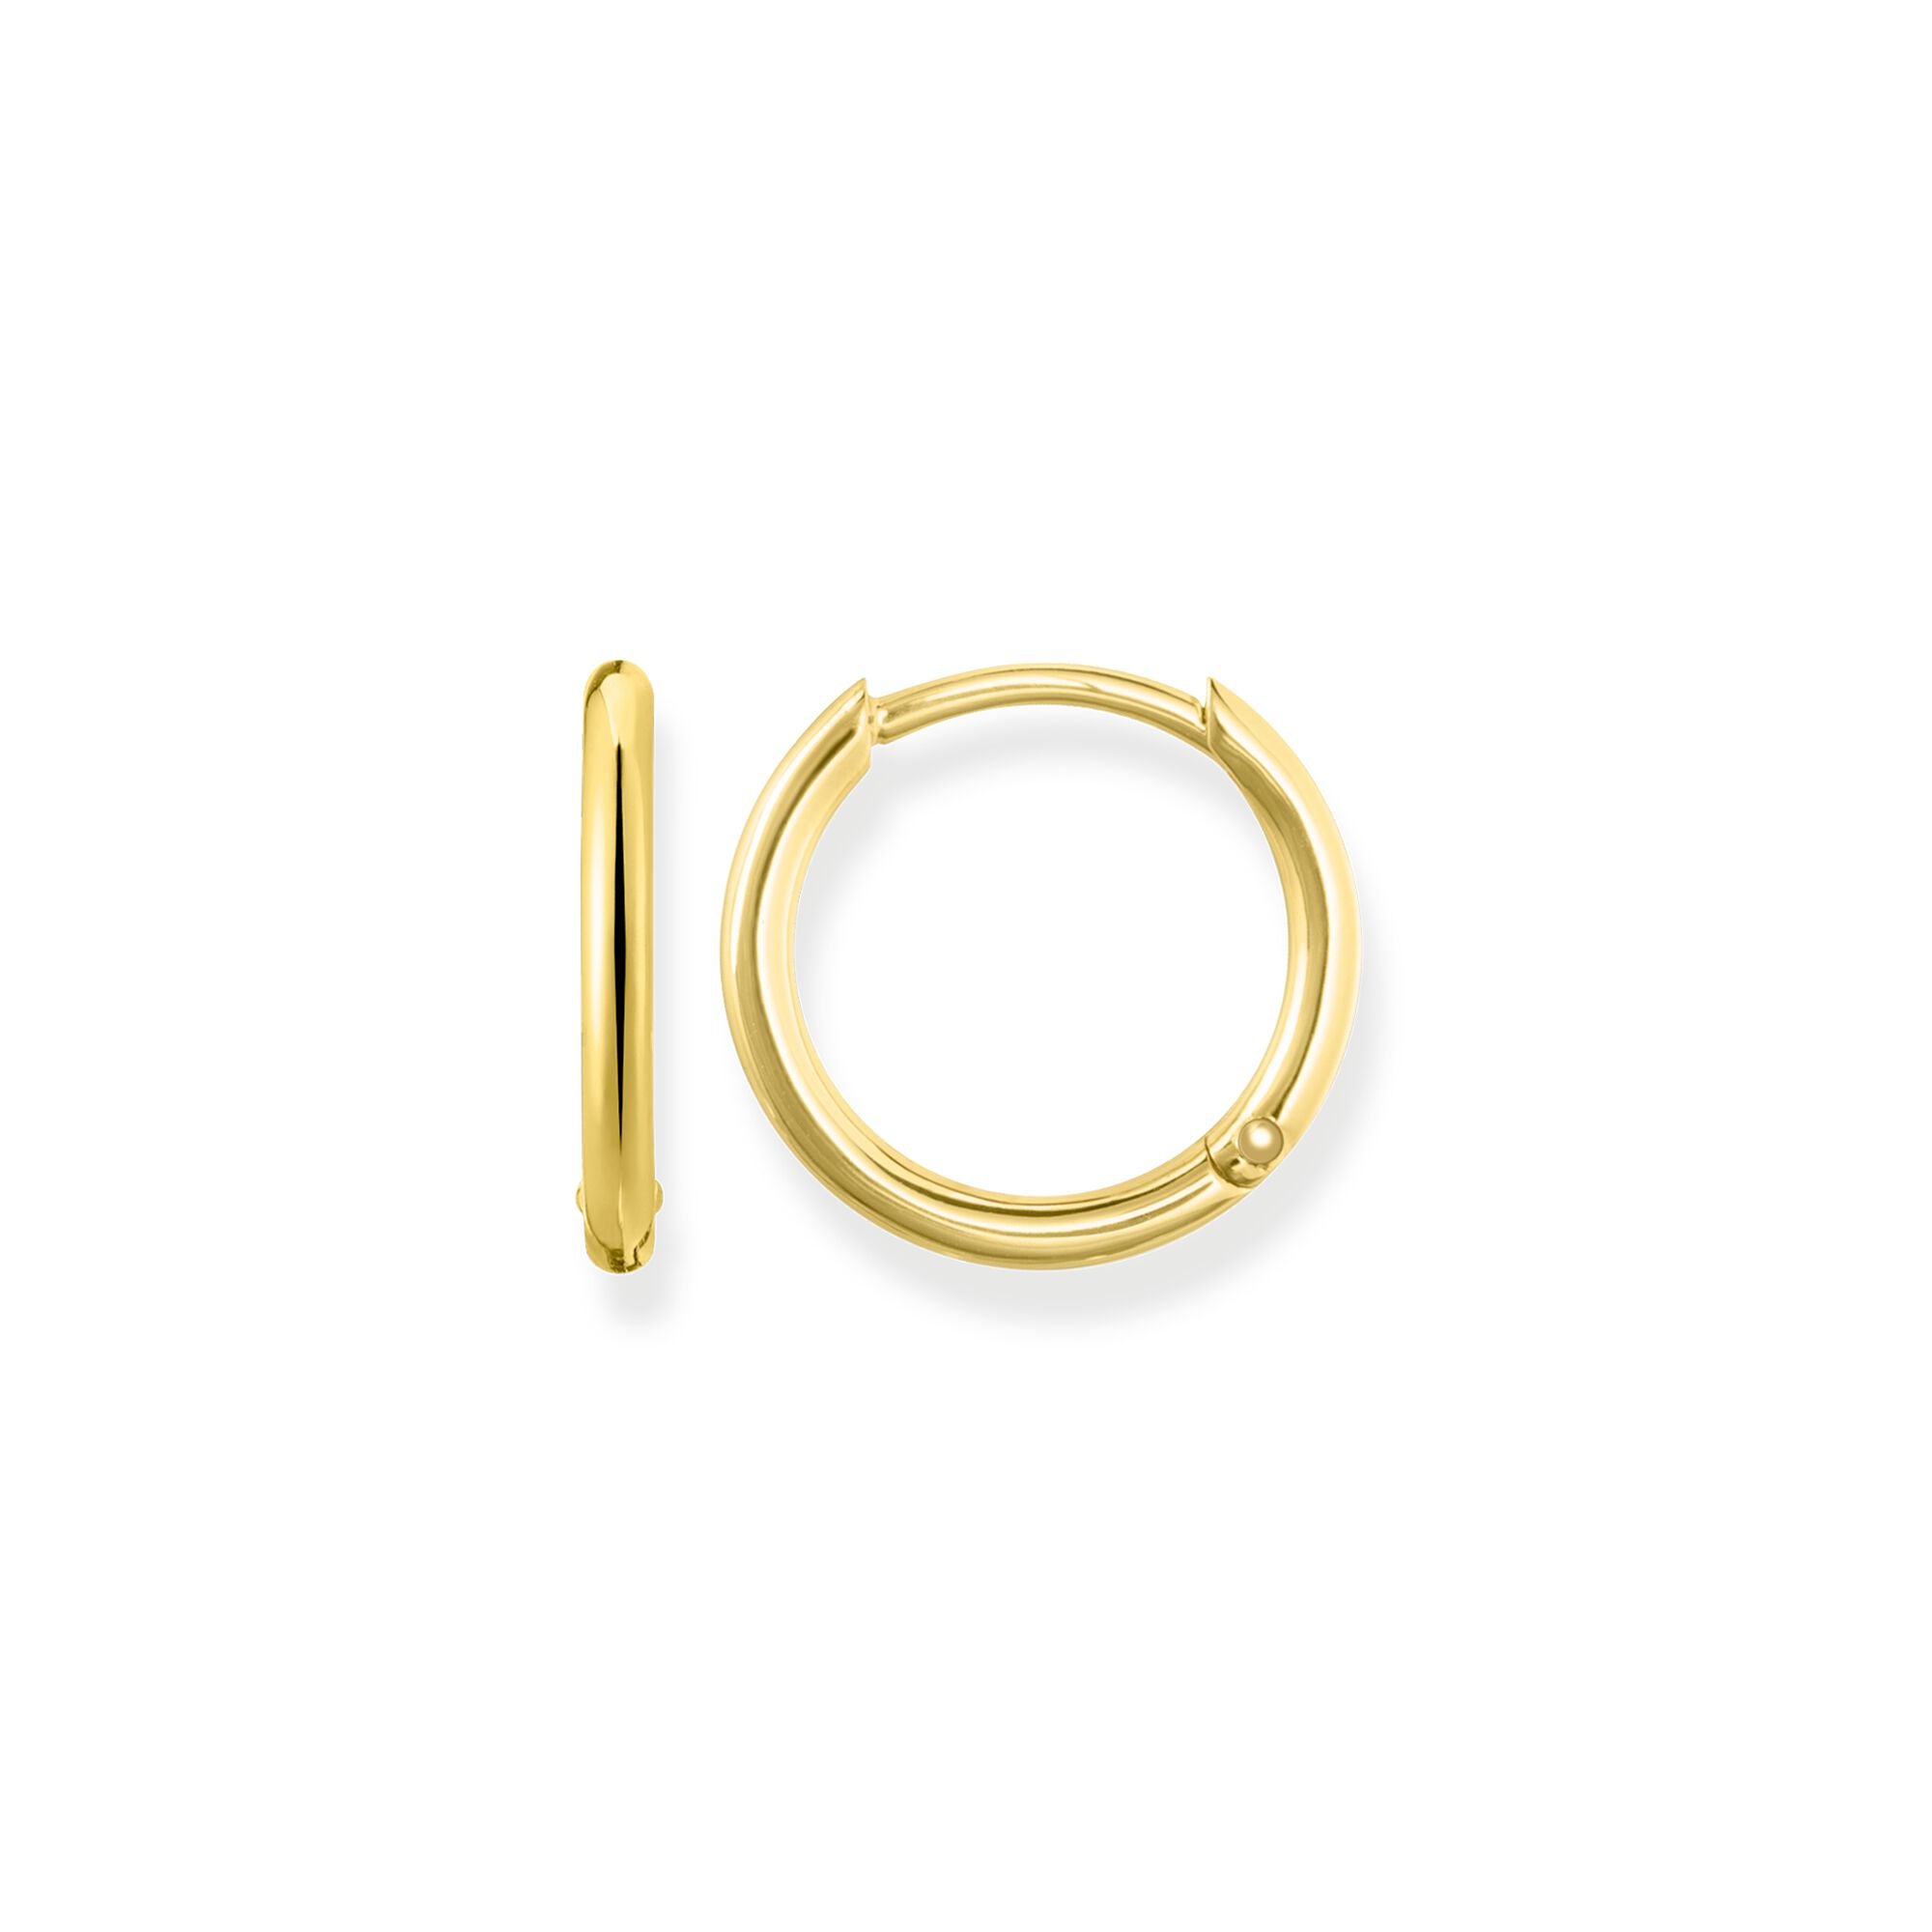 Thomas Sabo Yellow Gold Plated Sterling Silver Small Hoop Earrings